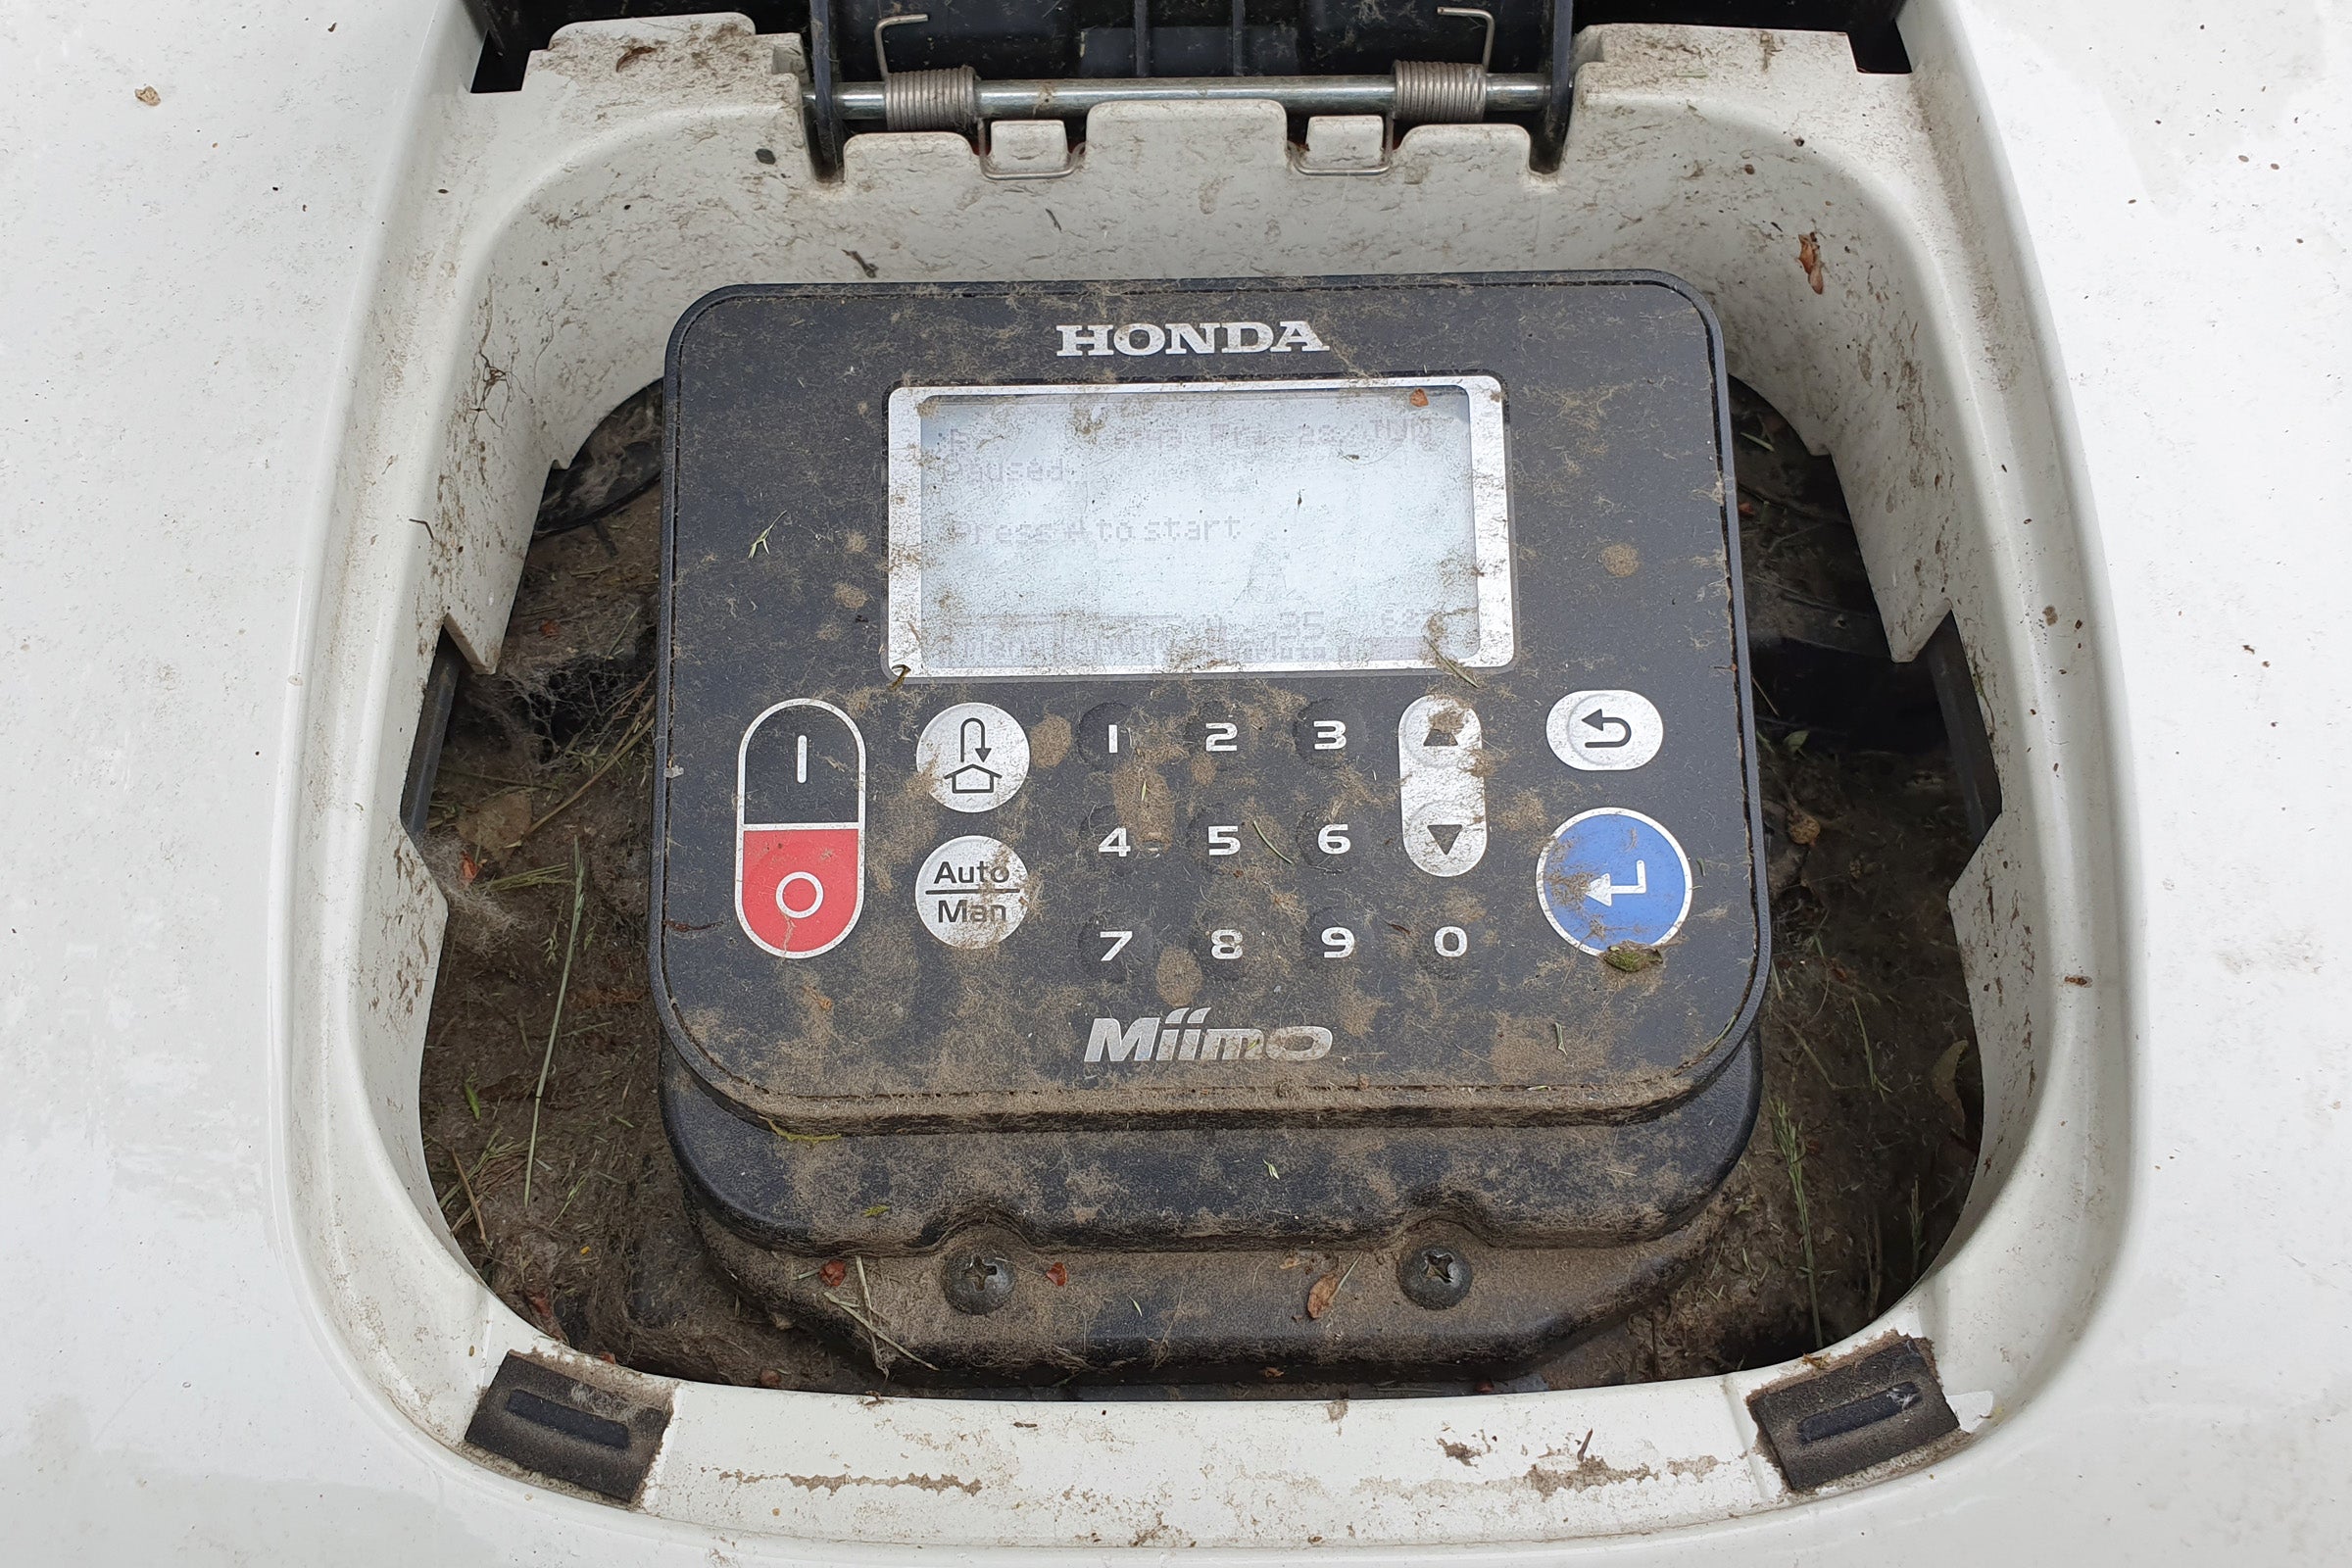 Close up view of control panel of a Honda Miimo 3000 robot lawnmower